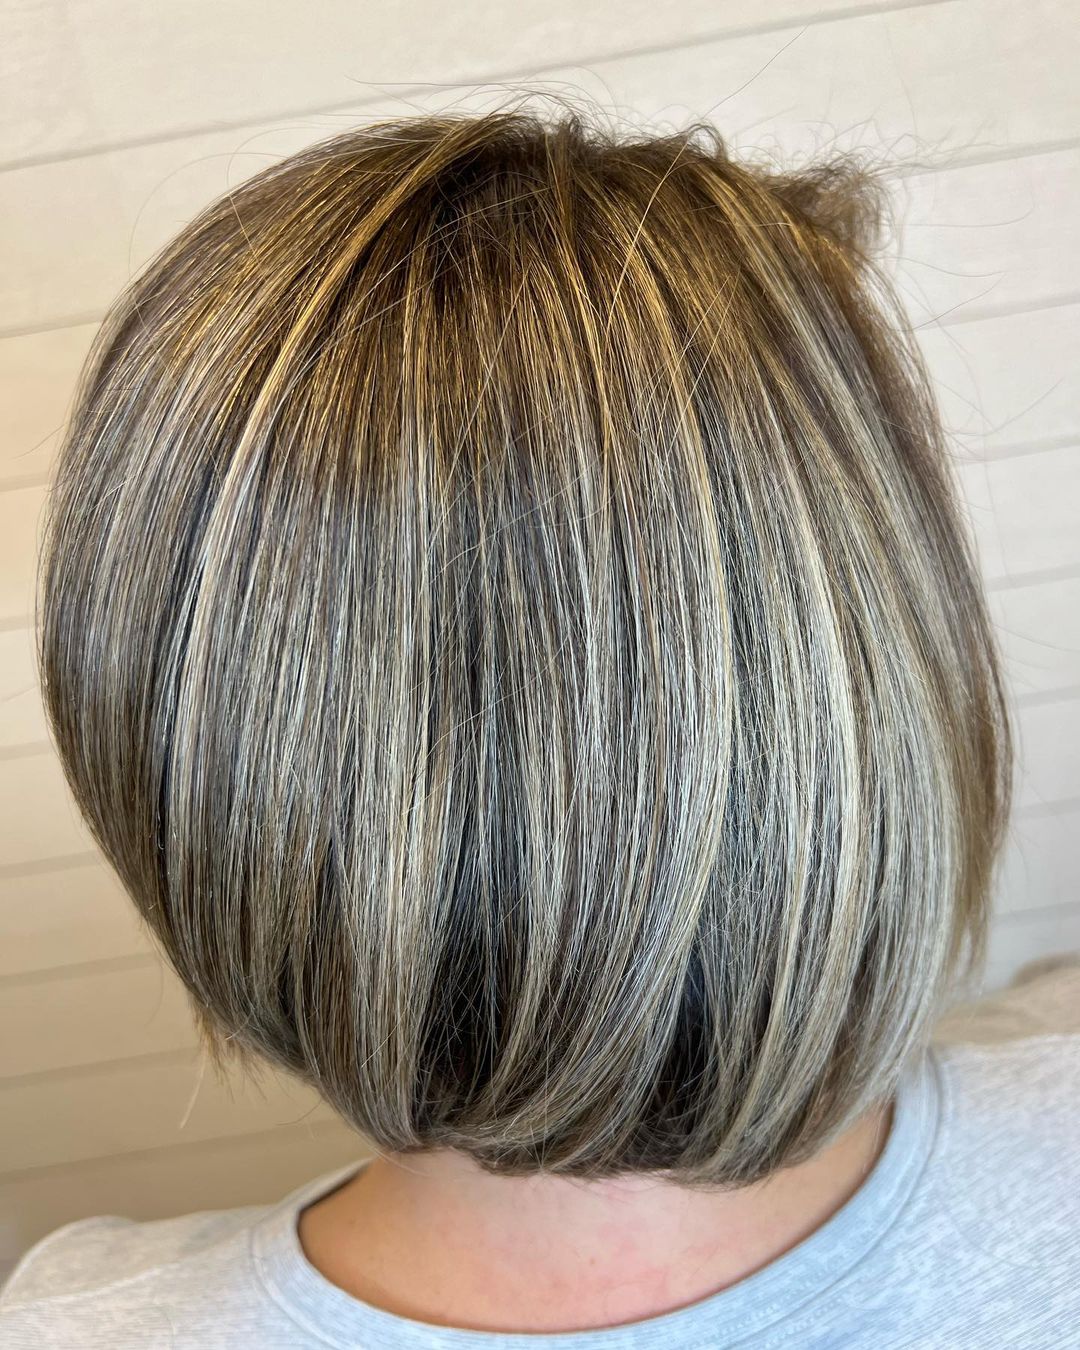 Stacked Bob 52 Long stacked bob | Medium length stacked bob | Pictures of stacked bob haircuts front and back Stacked Bob Hairstyles for Women